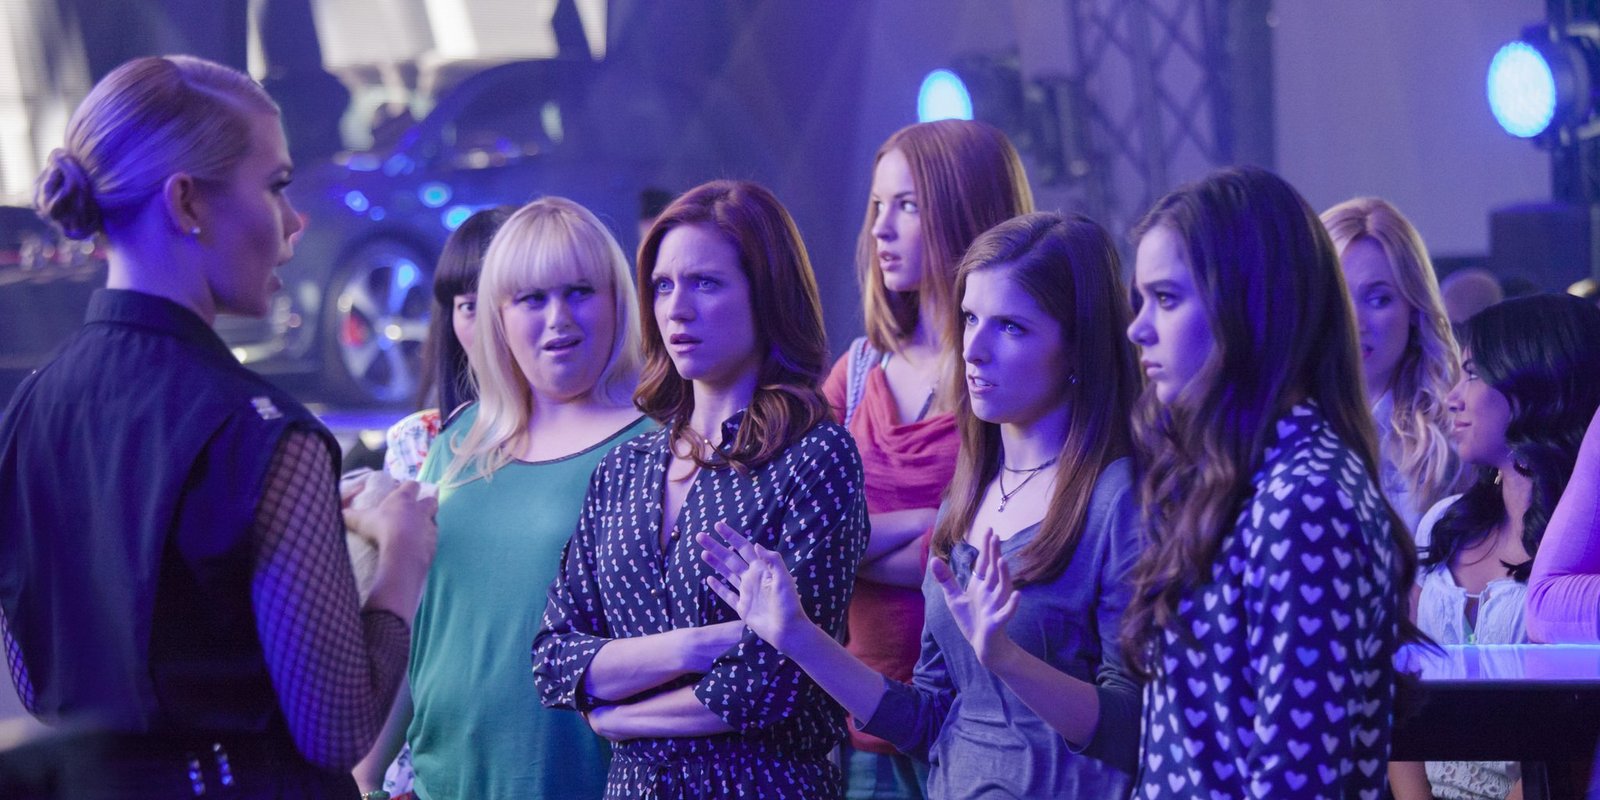 Pitch Perfect 2